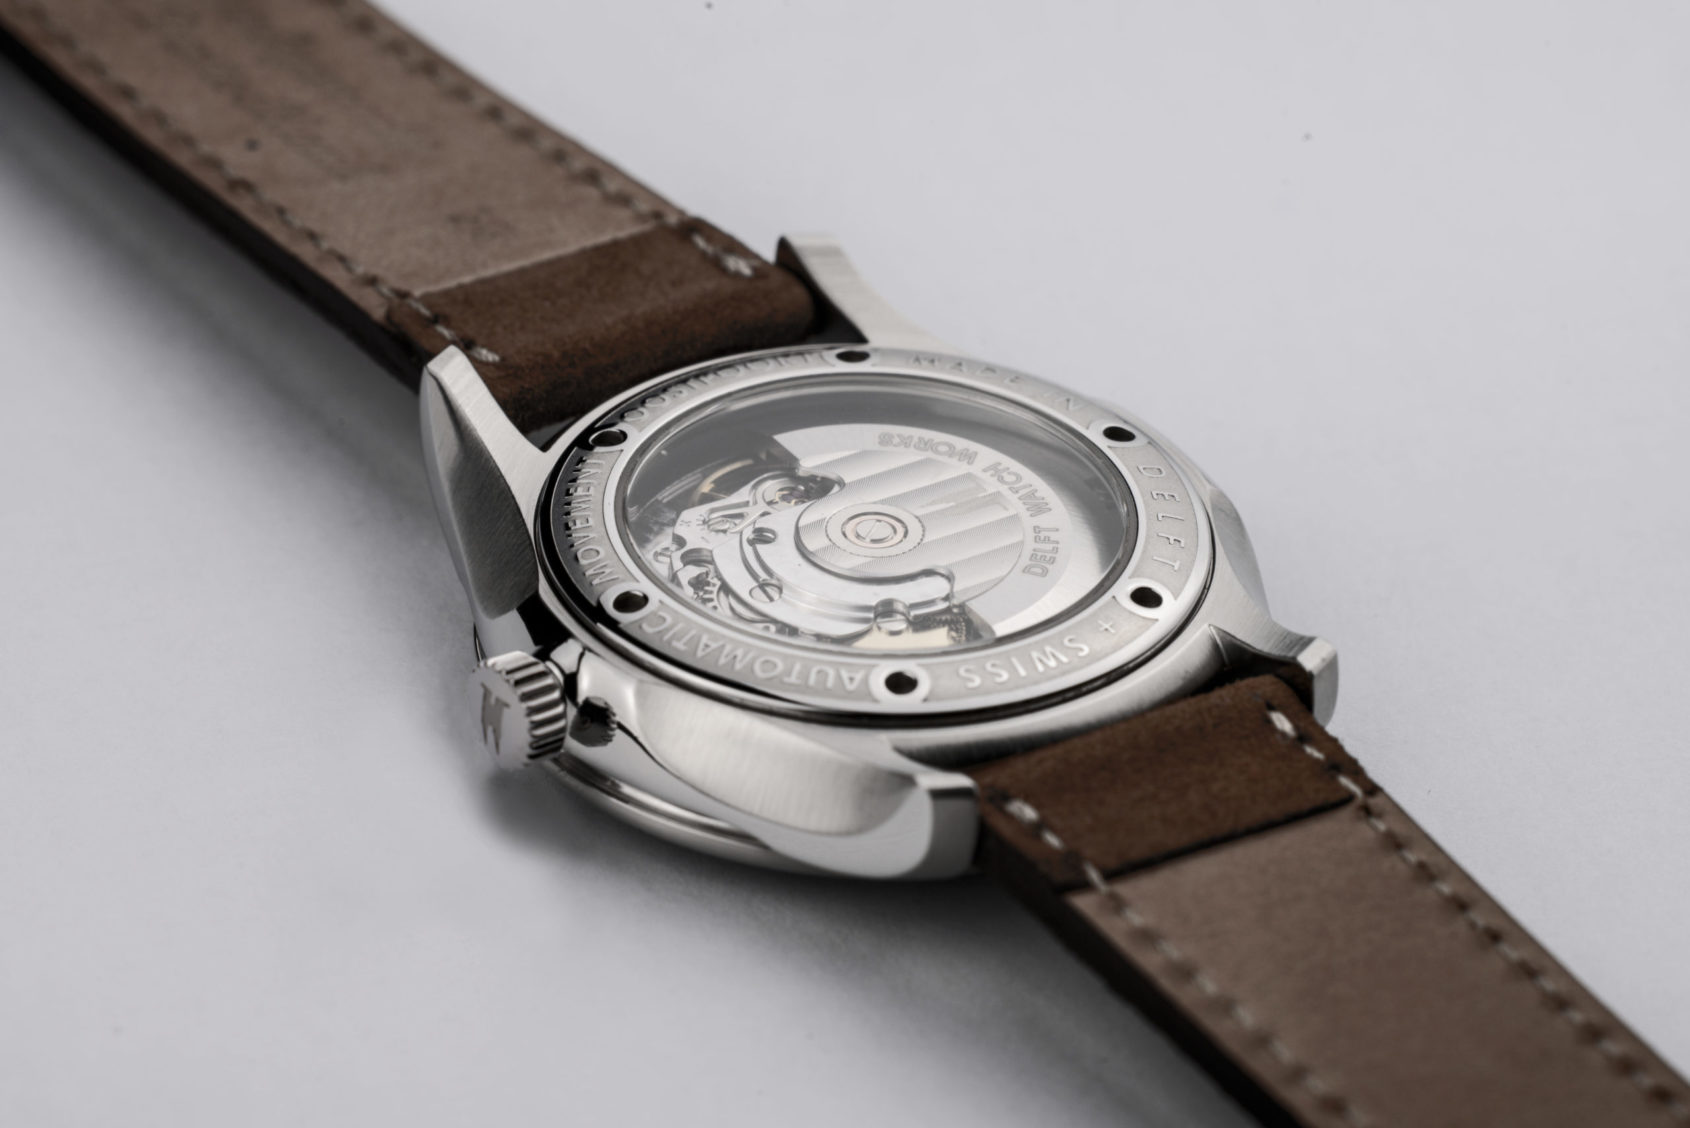 The Delft Watch Works Oostpoort delivers casual dress vibes at value